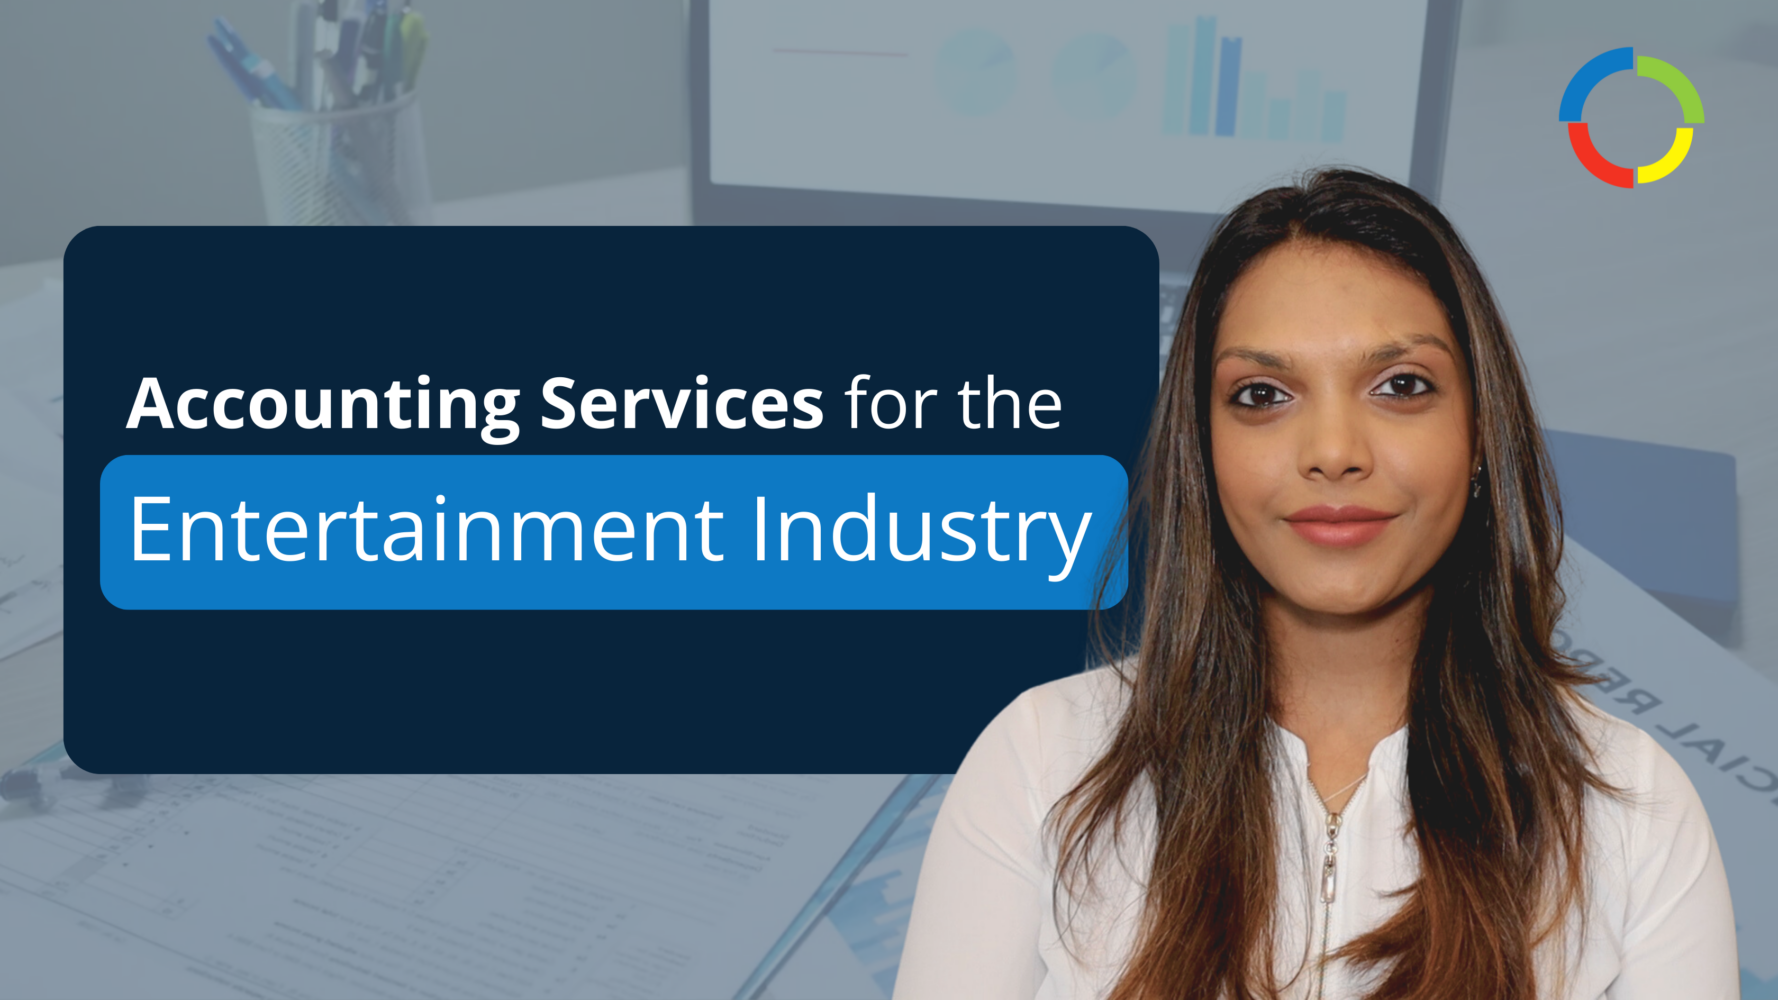 Our outsourced CPAs, tax accountants and CFO advisors can help you achieve financial success in the entertainment industry.